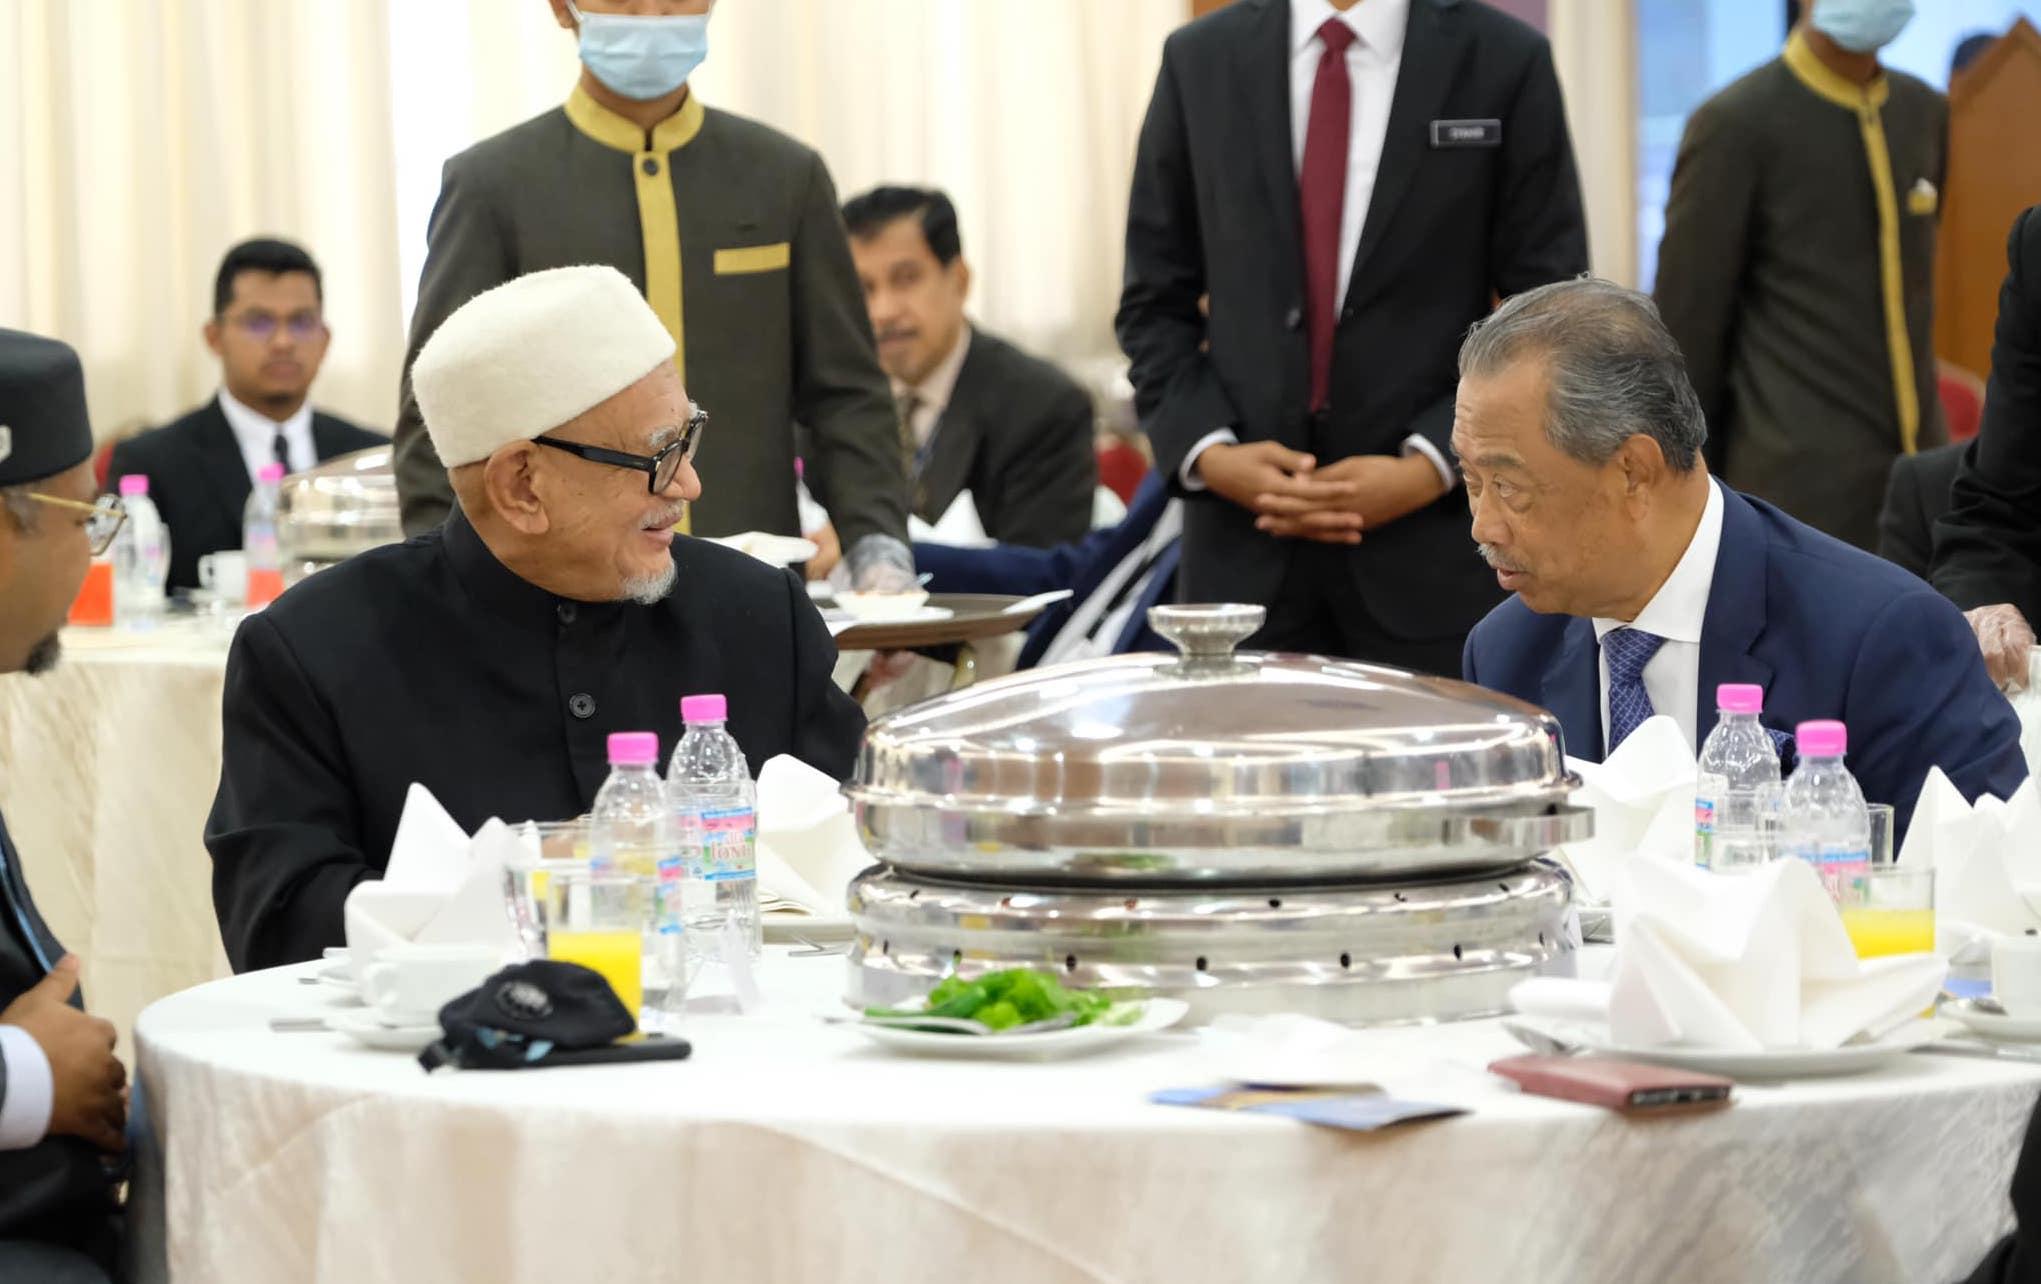 PAS president Abdul Hadi Awang with Prime Minister Muhyiddin Yassin. The Islamist party has rejected calls for it to leave the ruling coalition. Photo: Facebook